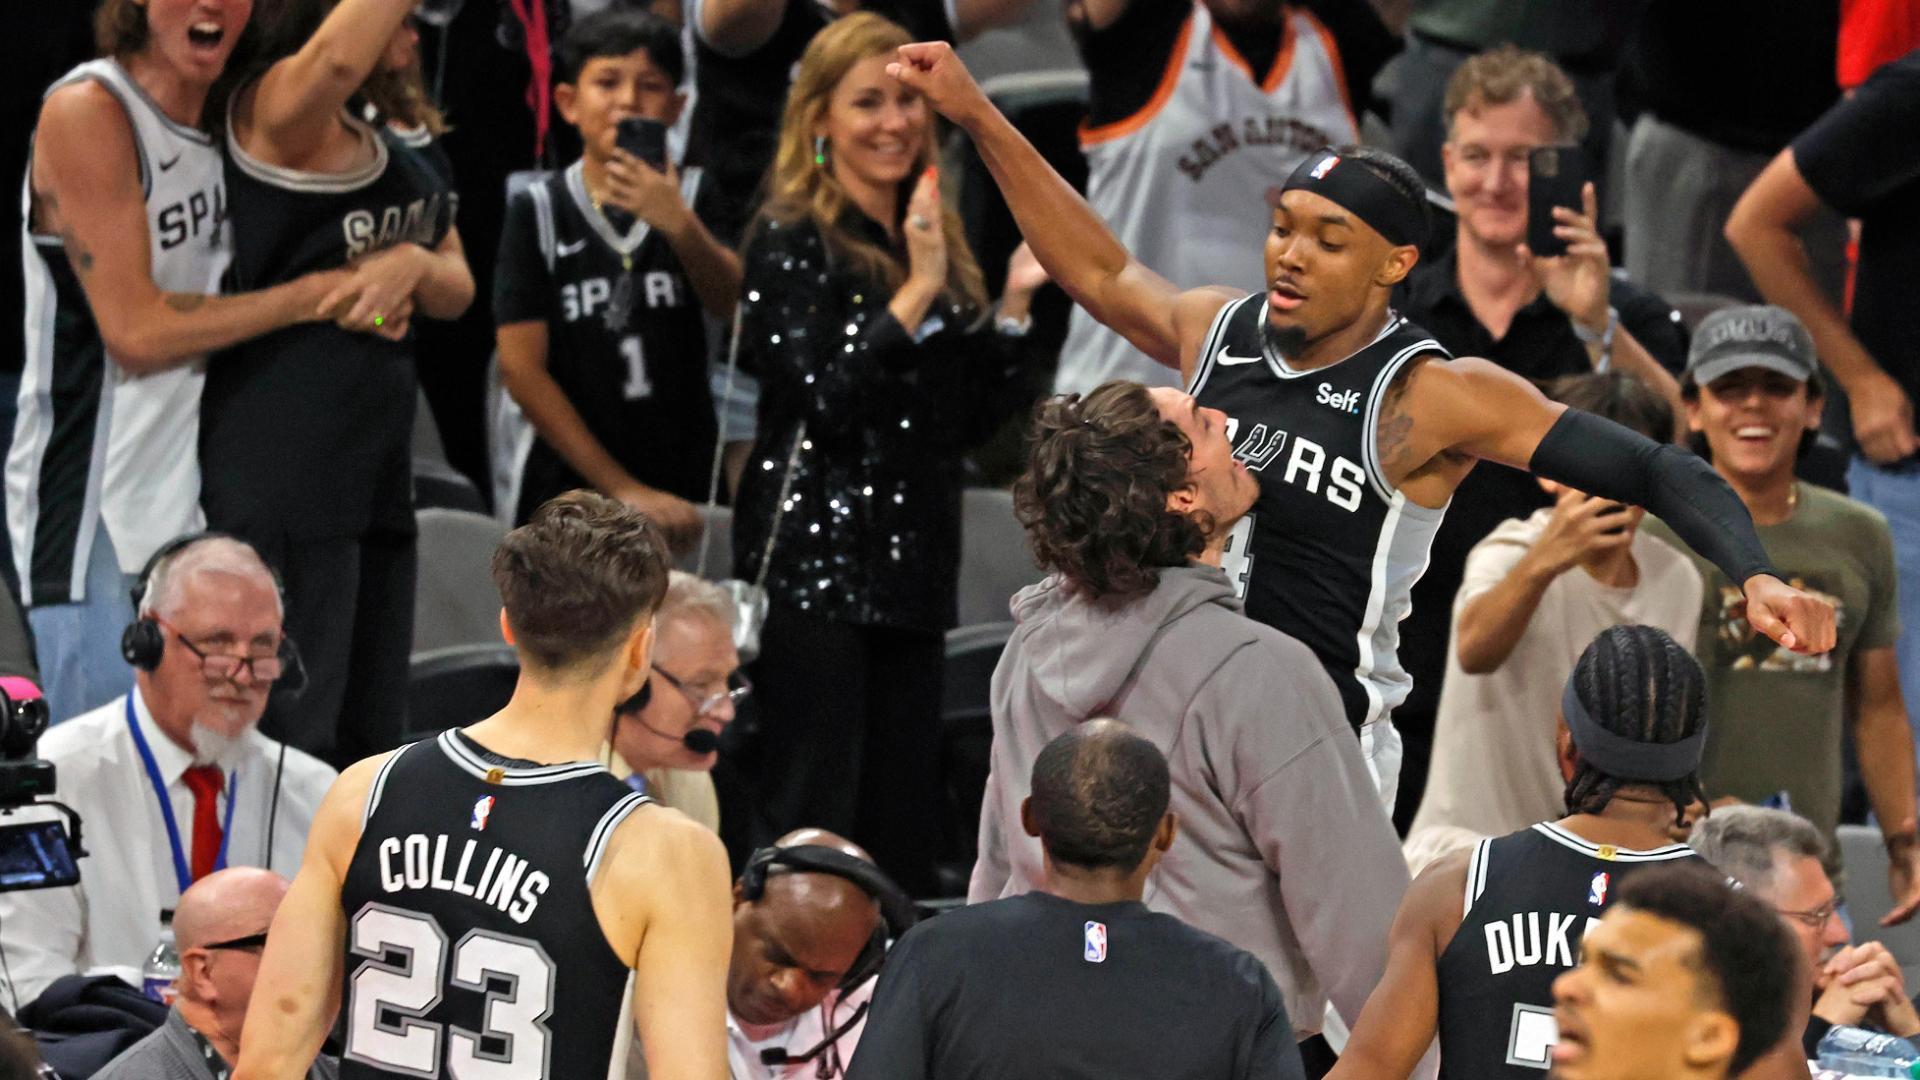 Devonte' Graham's floater wins it for Spurs in dramatic finish